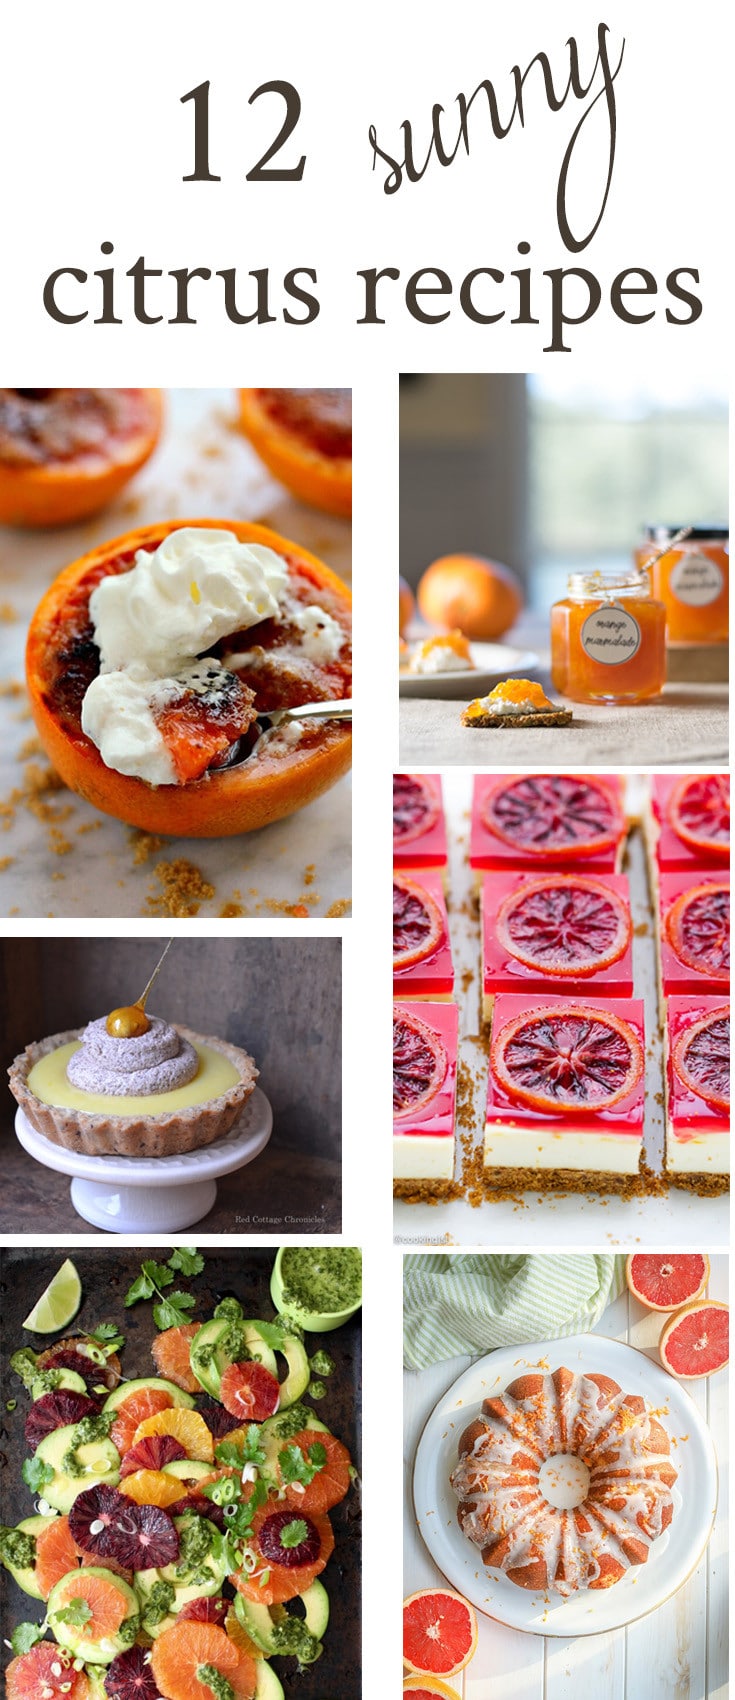 A curation of 12 sunny and delicious citrus recipes featuring oranges, lemons, grapefruits and limes in soups, salads, breakfast and dessert items.